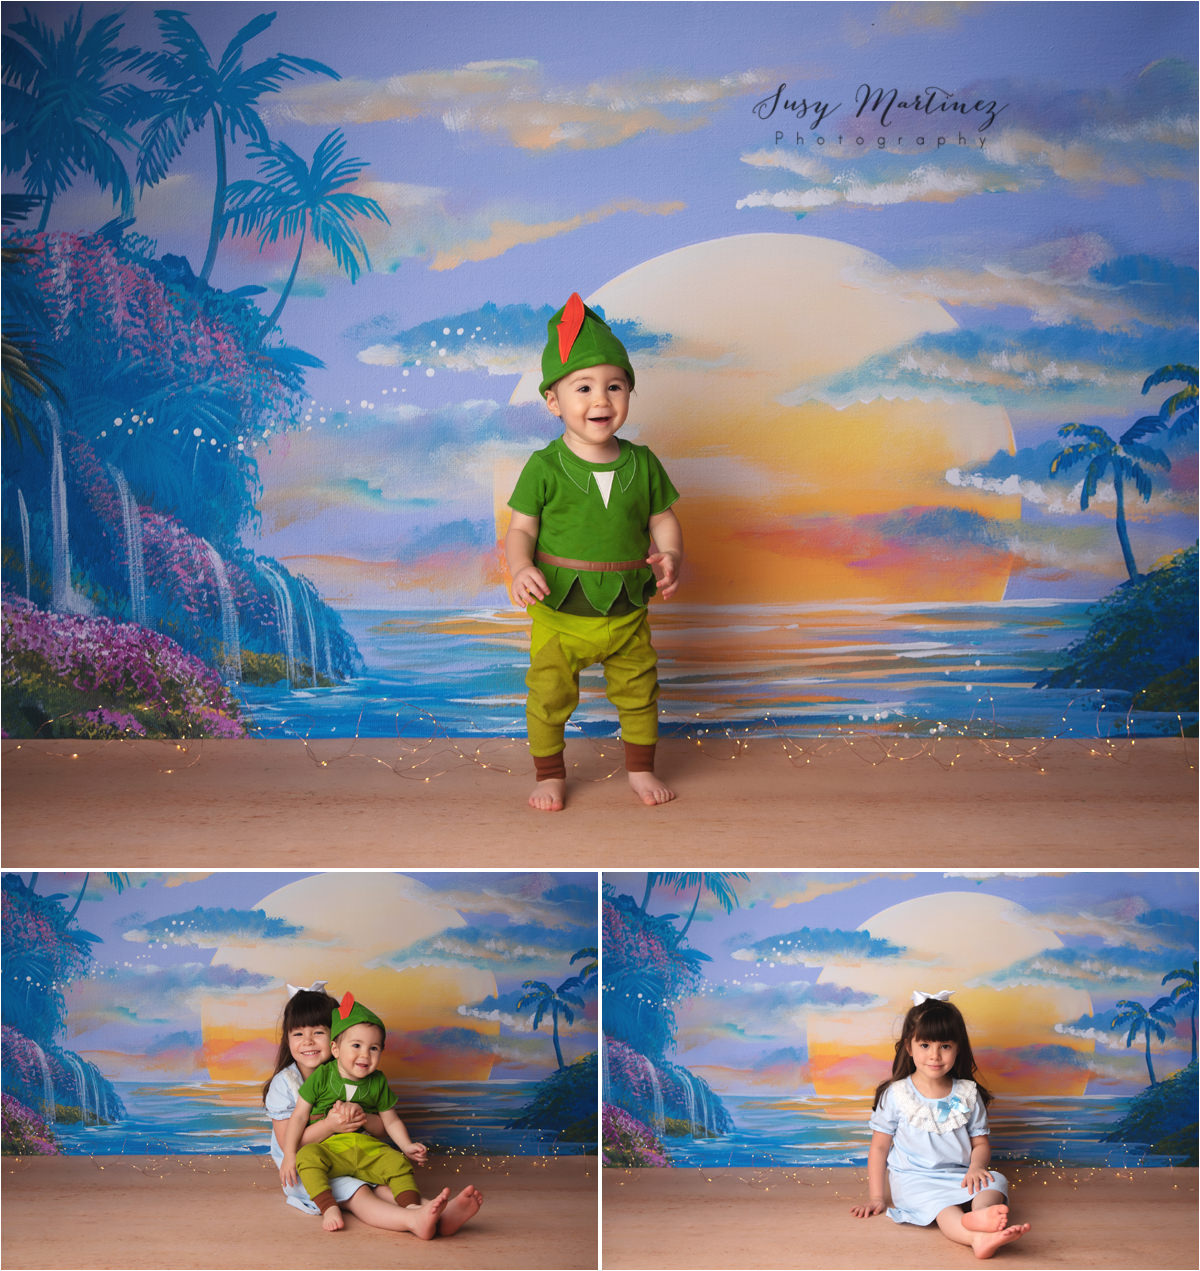 Peter Pan mini session with Susy Martinez Photography